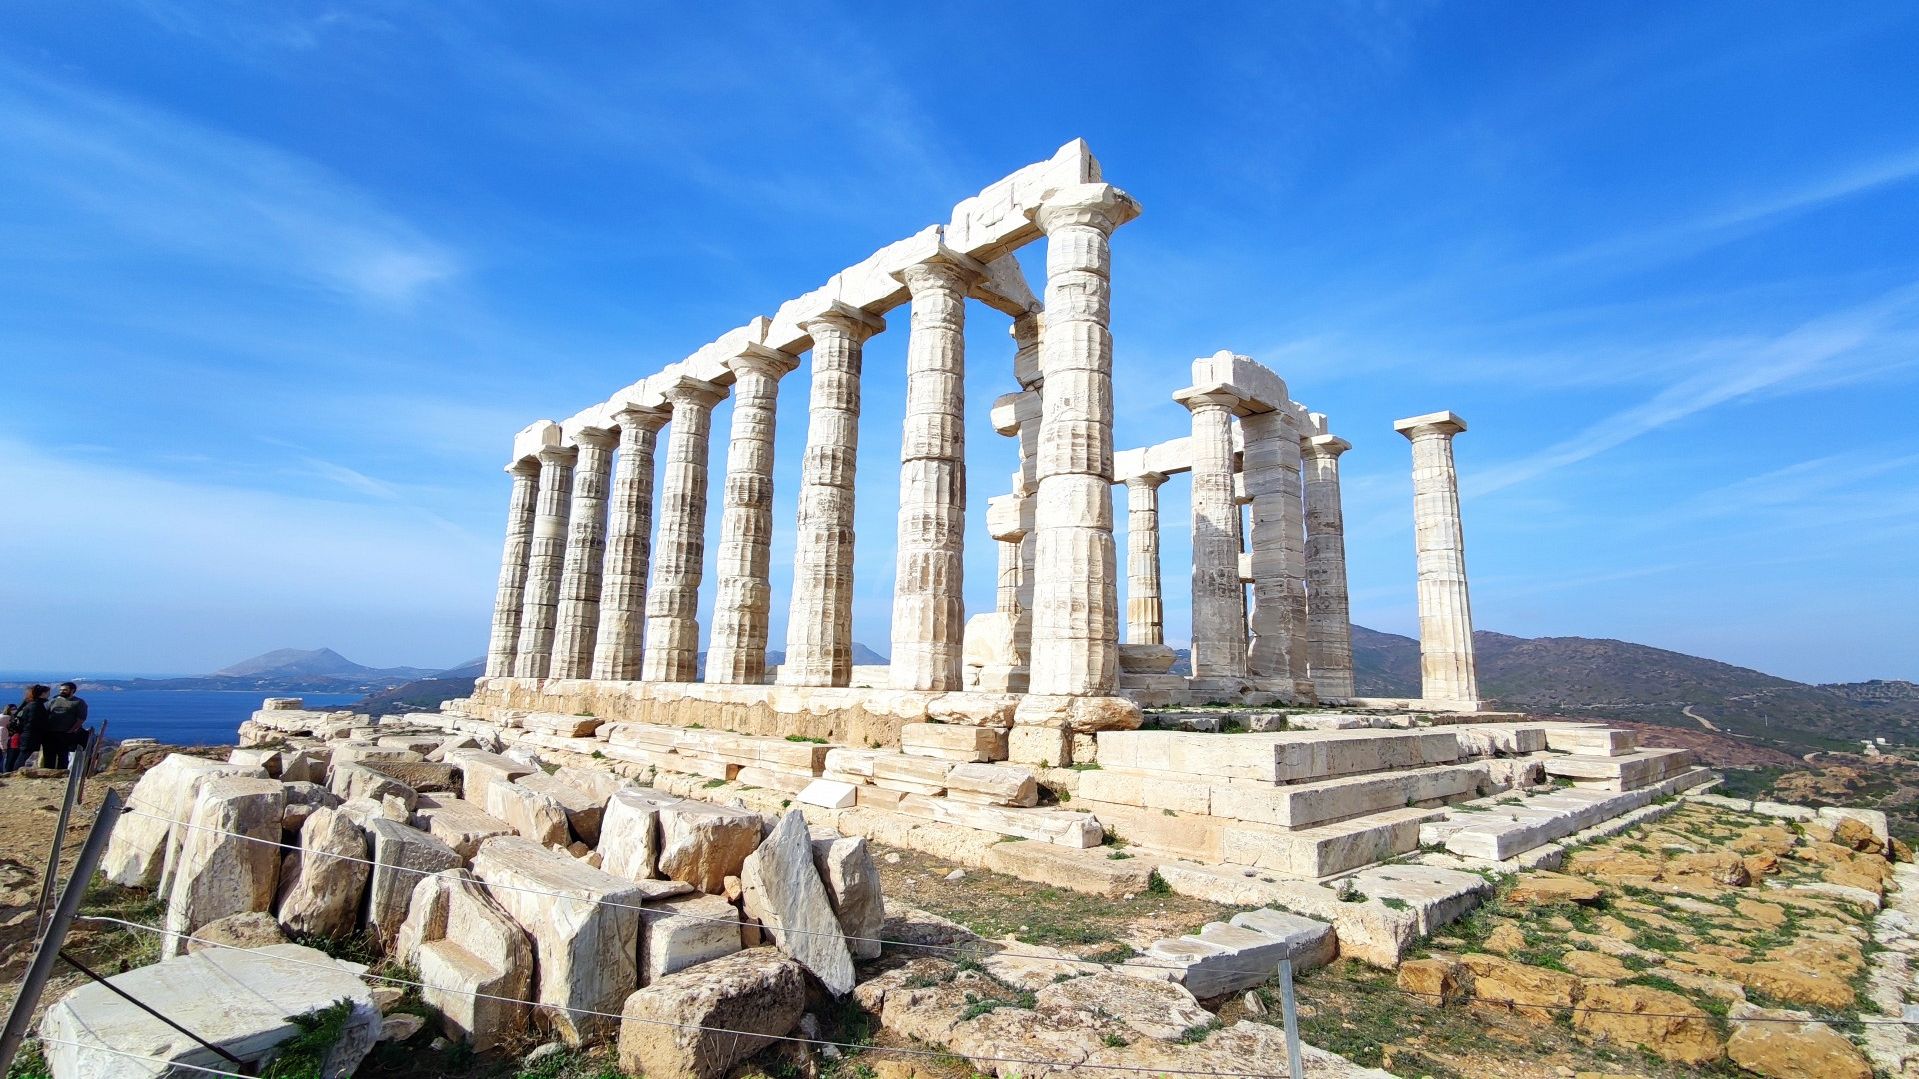 What to see near Athens